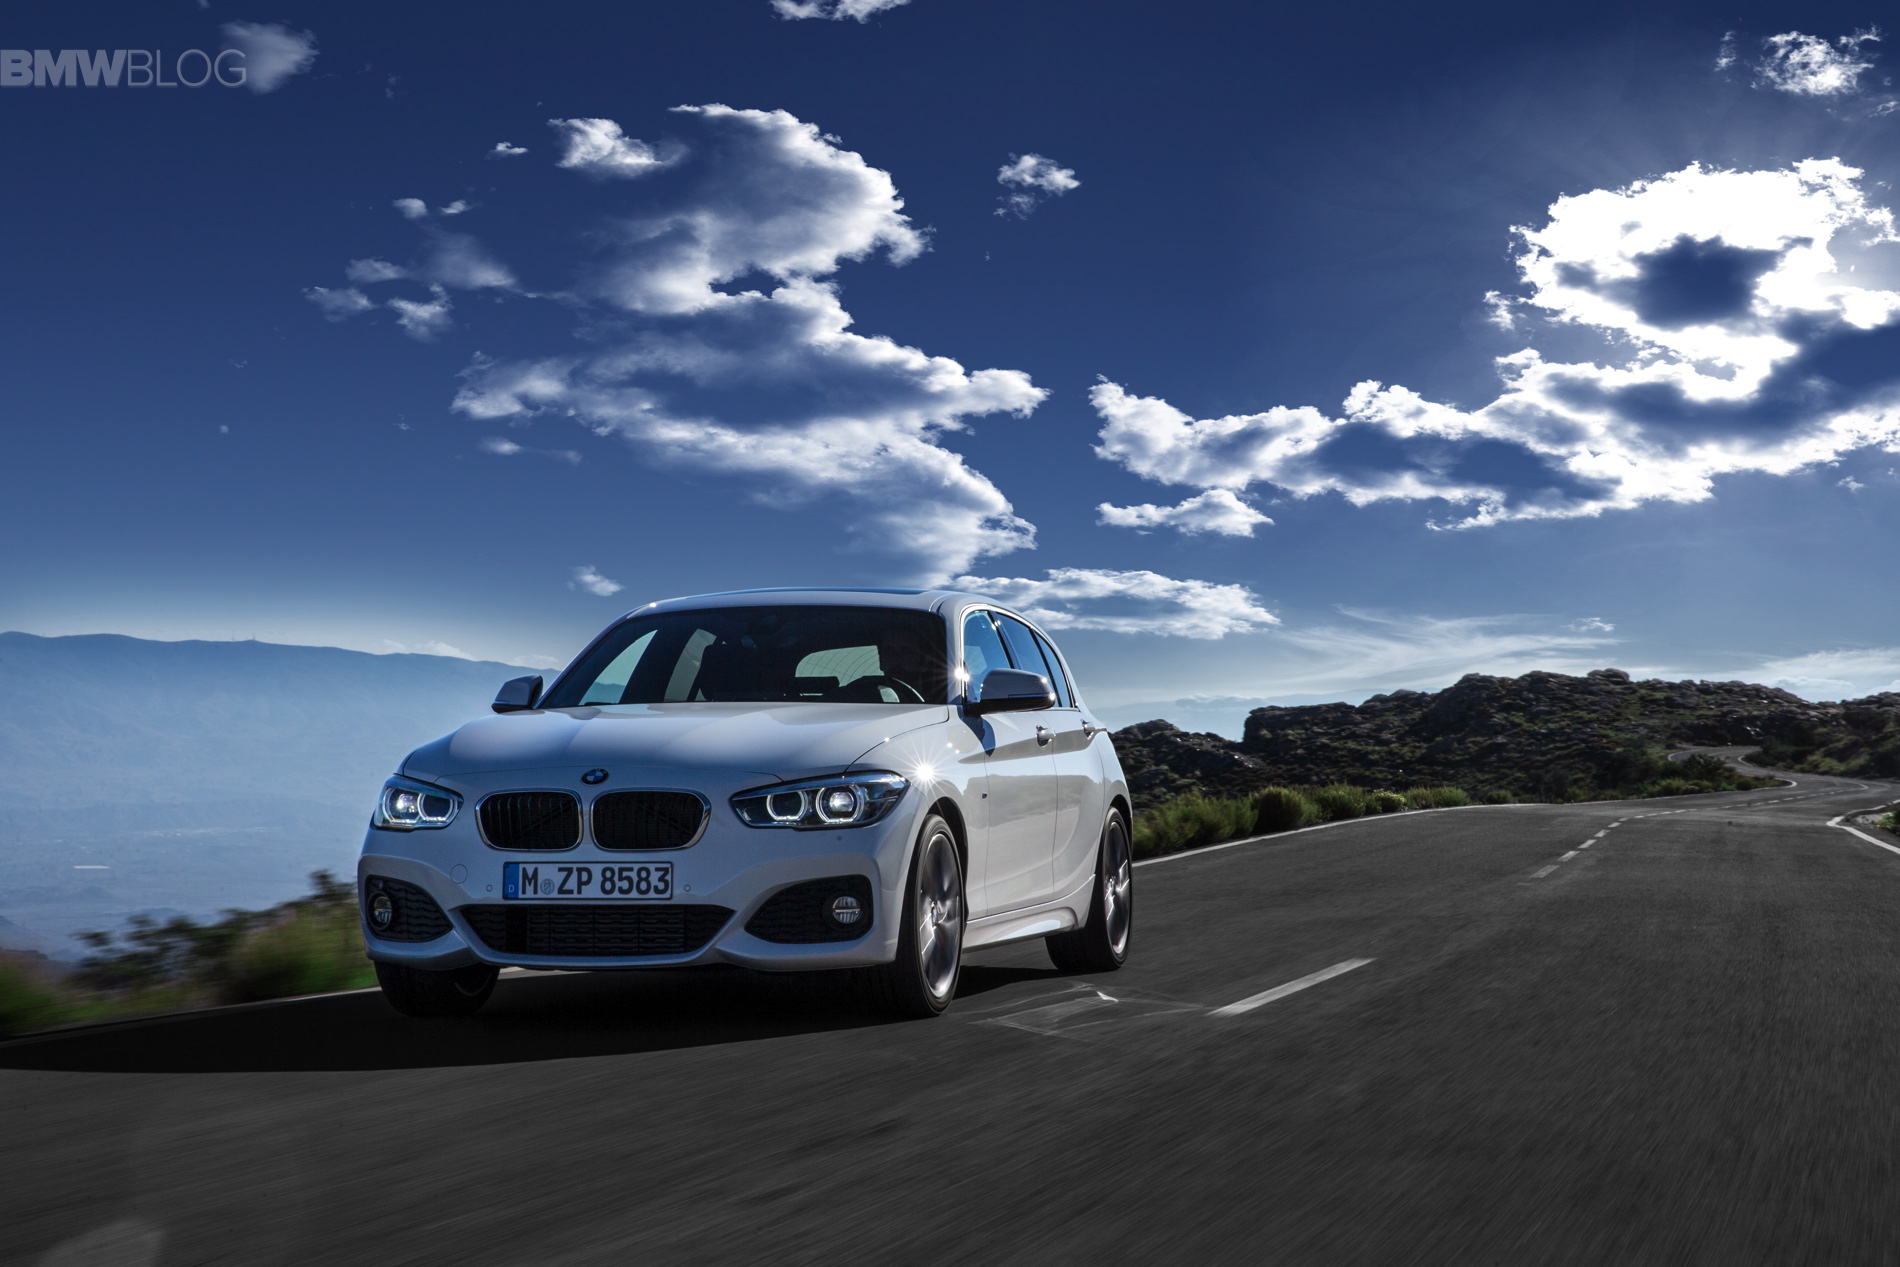 Bmw 135i option packages #3